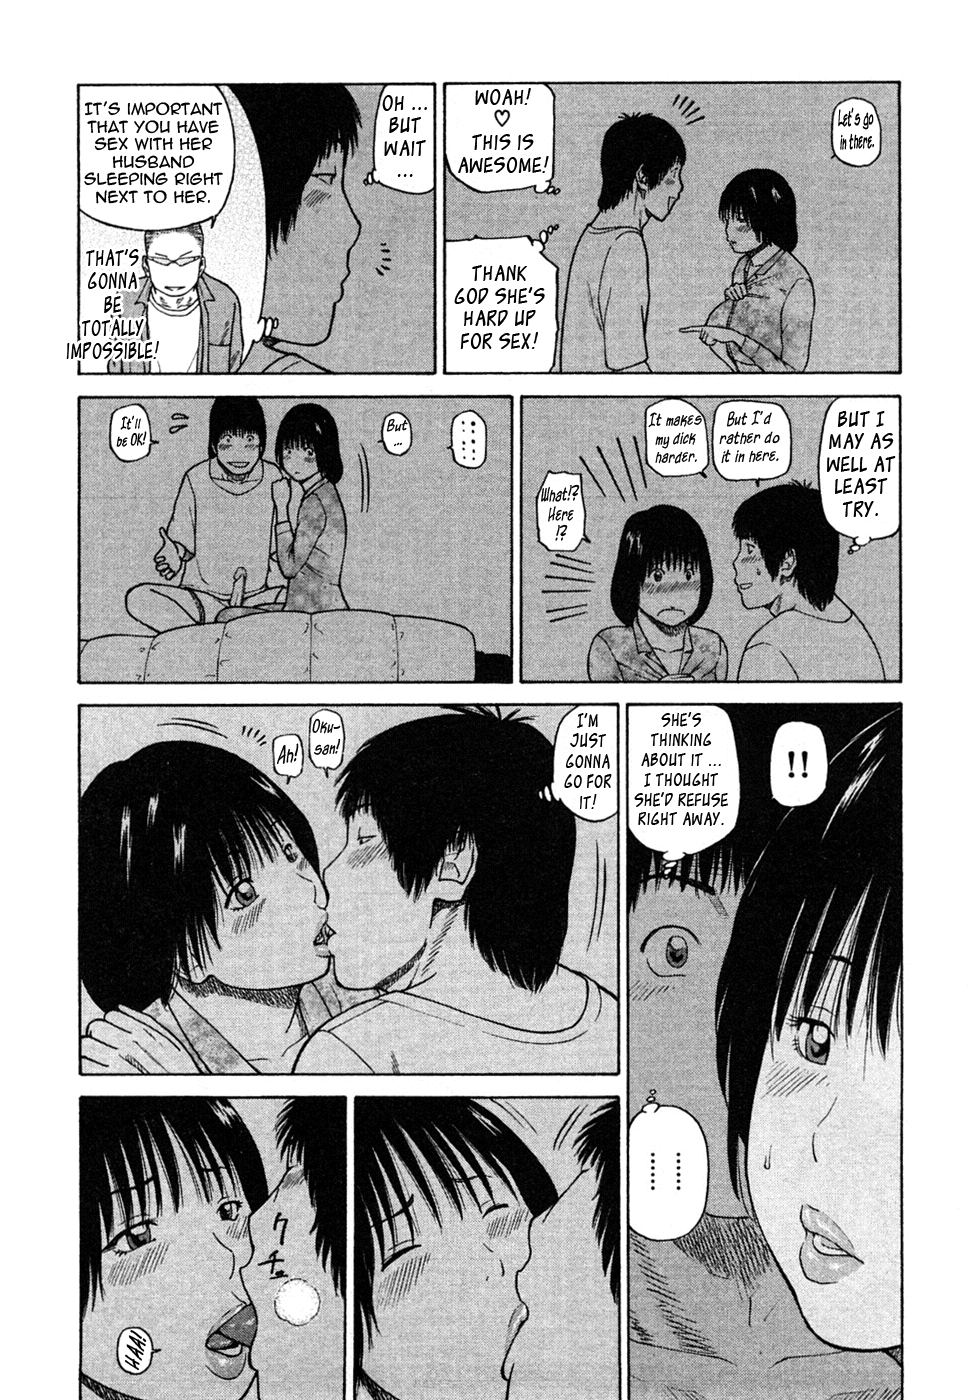 Hentai Manga Comic-29 Year Old Lusting Wife-Chapter 4-My Friend's Wife-10